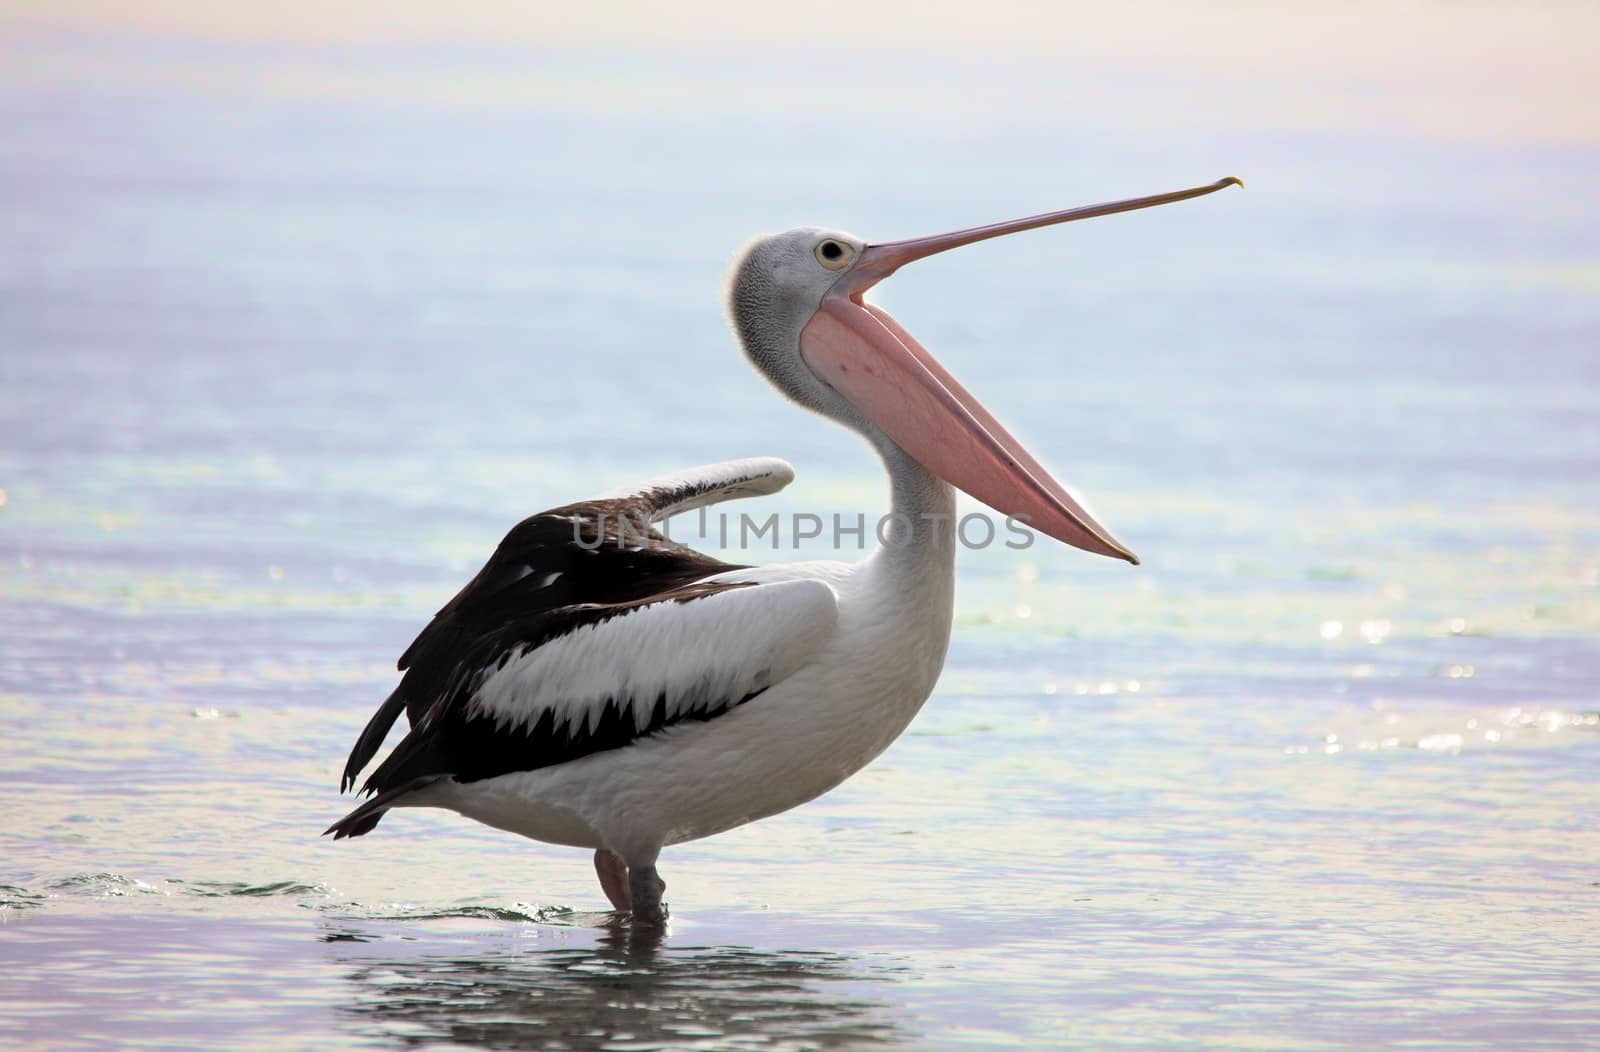 An Australian pelican, Pelecanus conspicillatus, yawns and stretches wing and then leg, at dawn.  Australian pelican's bills are around 0.5m long.